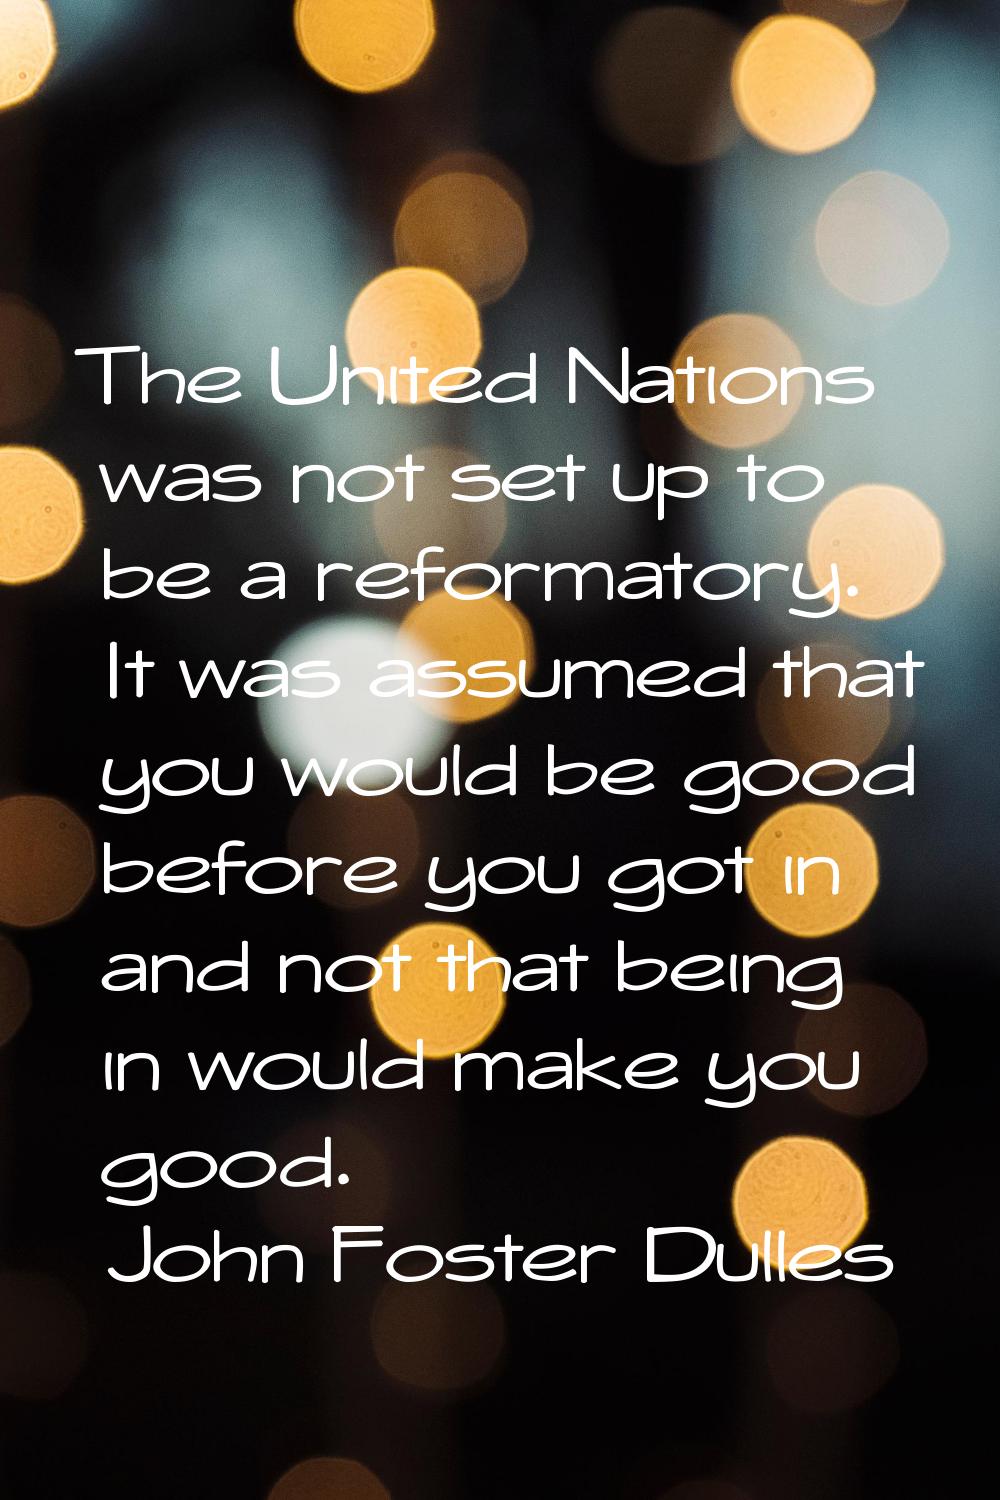 The United Nations was not set up to be a reformatory. It was assumed that you would be good before